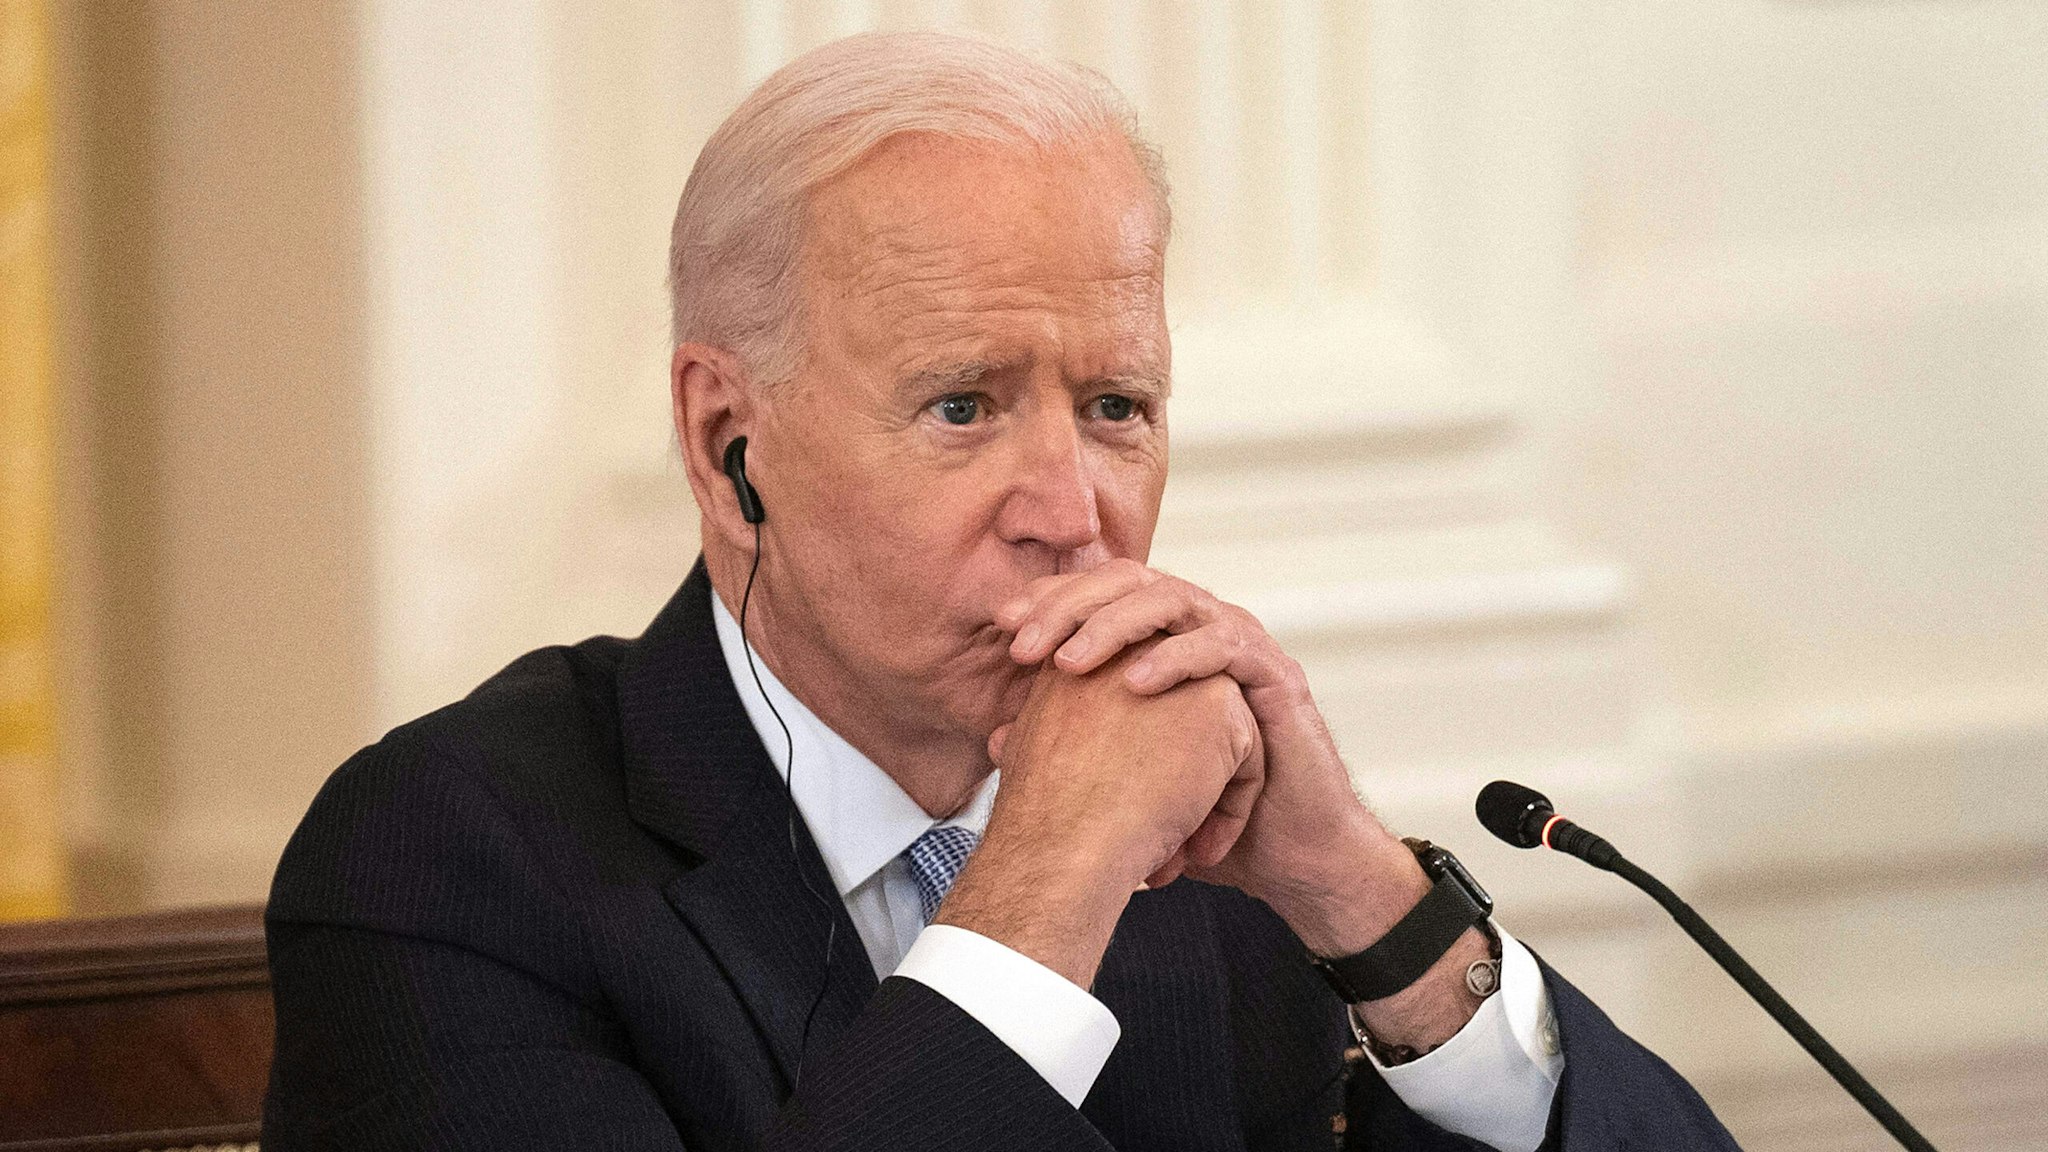 US President Joe Biden listens as India Prime Minister Narendra Modi speaks with Japan Prime Minister Suga Yoshihide and Australian Primer Minister Scott Morrison during the first-ever in-person Quad Leaders Summit in the East Room of the White House in Washington, DC, on September 24, 2021.